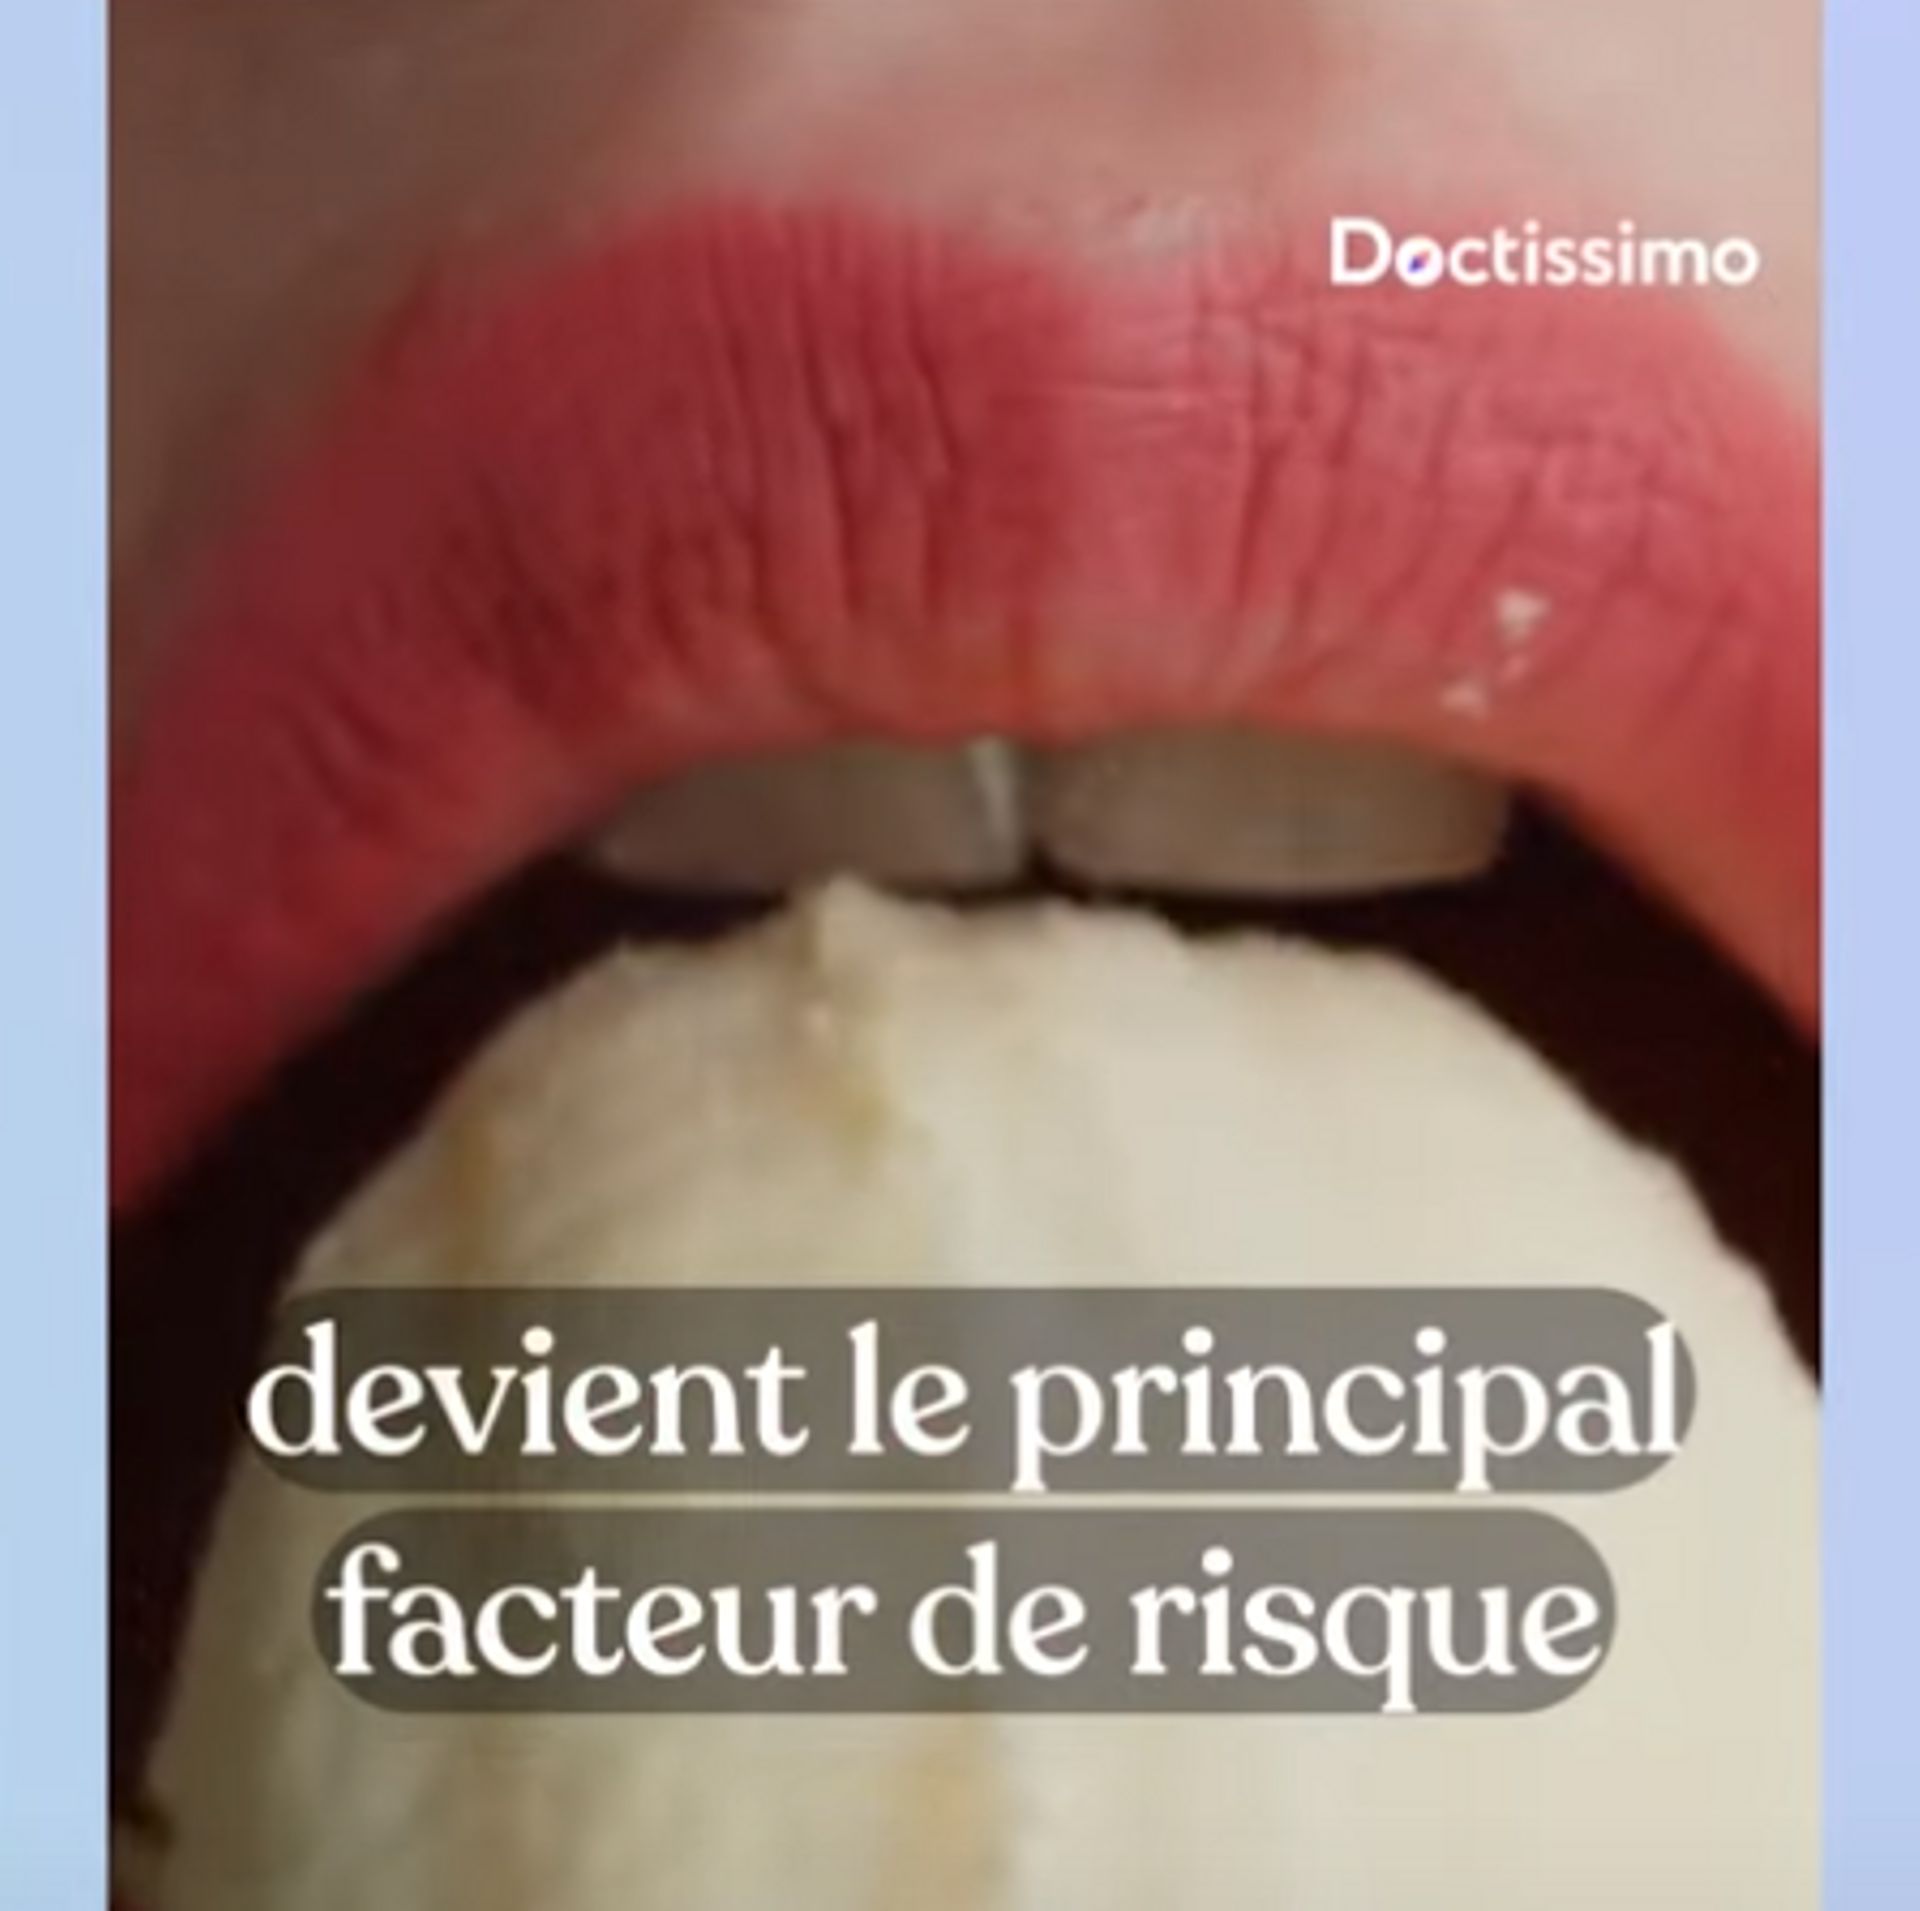 Grossesse et tabac : les risques - Doctissimo